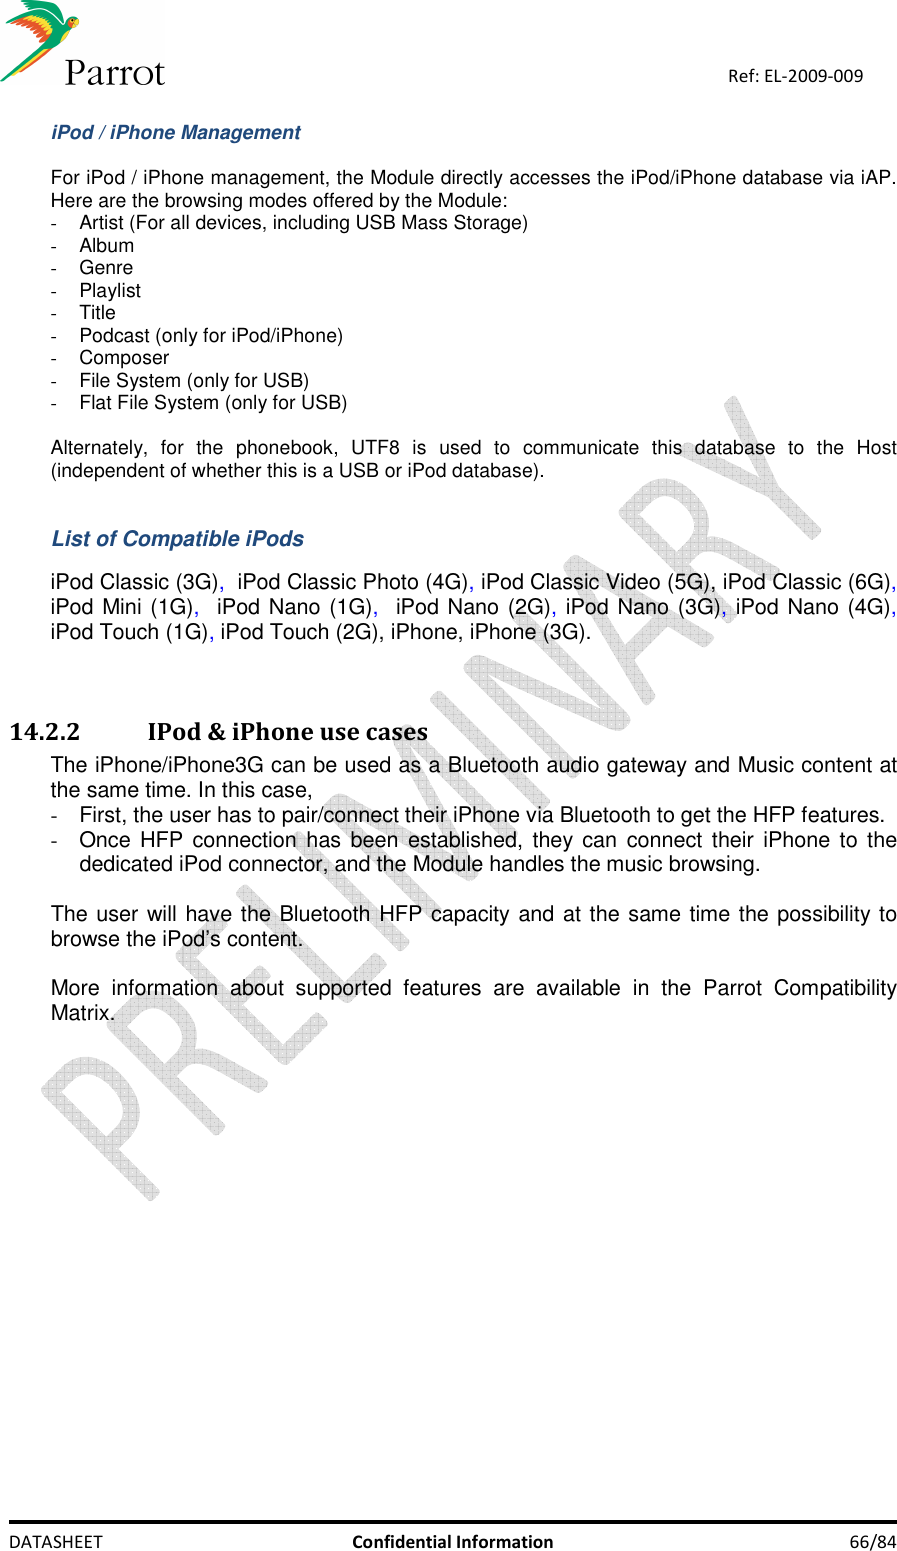    DATASHEET  Confidential Information  66/84 Ref: EL-2009-009  iPod / iPhone Management  For iPod / iPhone management, the Module directly accesses the iPod/iPhone database via iAP. Here are the browsing modes offered by the Module: -  Artist (For all devices, including USB Mass Storage) -  Album -  Genre -  Playlist -  Title -  Podcast (only for iPod/iPhone) -  Composer -  File System (only for USB) -  Flat File System (only for USB)  Alternately,  for  the  phonebook,  UTF8  is  used  to  communicate  this  database  to  the  Host (independent of whether this is a USB or iPod database).   List of Compatible iPods  iPod Classic (3G),  iPod Classic Photo (4G), iPod Classic Video (5G), iPod Classic (6G), iPod Mini (1G),  iPod Nano (1G),  iPod Nano (2G), iPod Nano (3G), iPod Nano (4G), iPod Touch (1G), iPod Touch (2G), iPhone, iPhone (3G).   14.2.2 IPod &amp; iPhone use cases The iPhone/iPhone3G can be used as a Bluetooth audio gateway and Music content at the same time. In this case,  -  First, the user has to pair/connect their iPhone via Bluetooth to get the HFP features. -  Once HFP connection has been  established, they can connect their  iPhone to  the dedicated iPod connector, and the Module handles the music browsing.  The user will have the Bluetooth HFP capacity and at the same time the possibility to browse the iPod’s content.  More  information  about  supported  features  are  available  in  the  Parrot  Compatibility Matrix.   